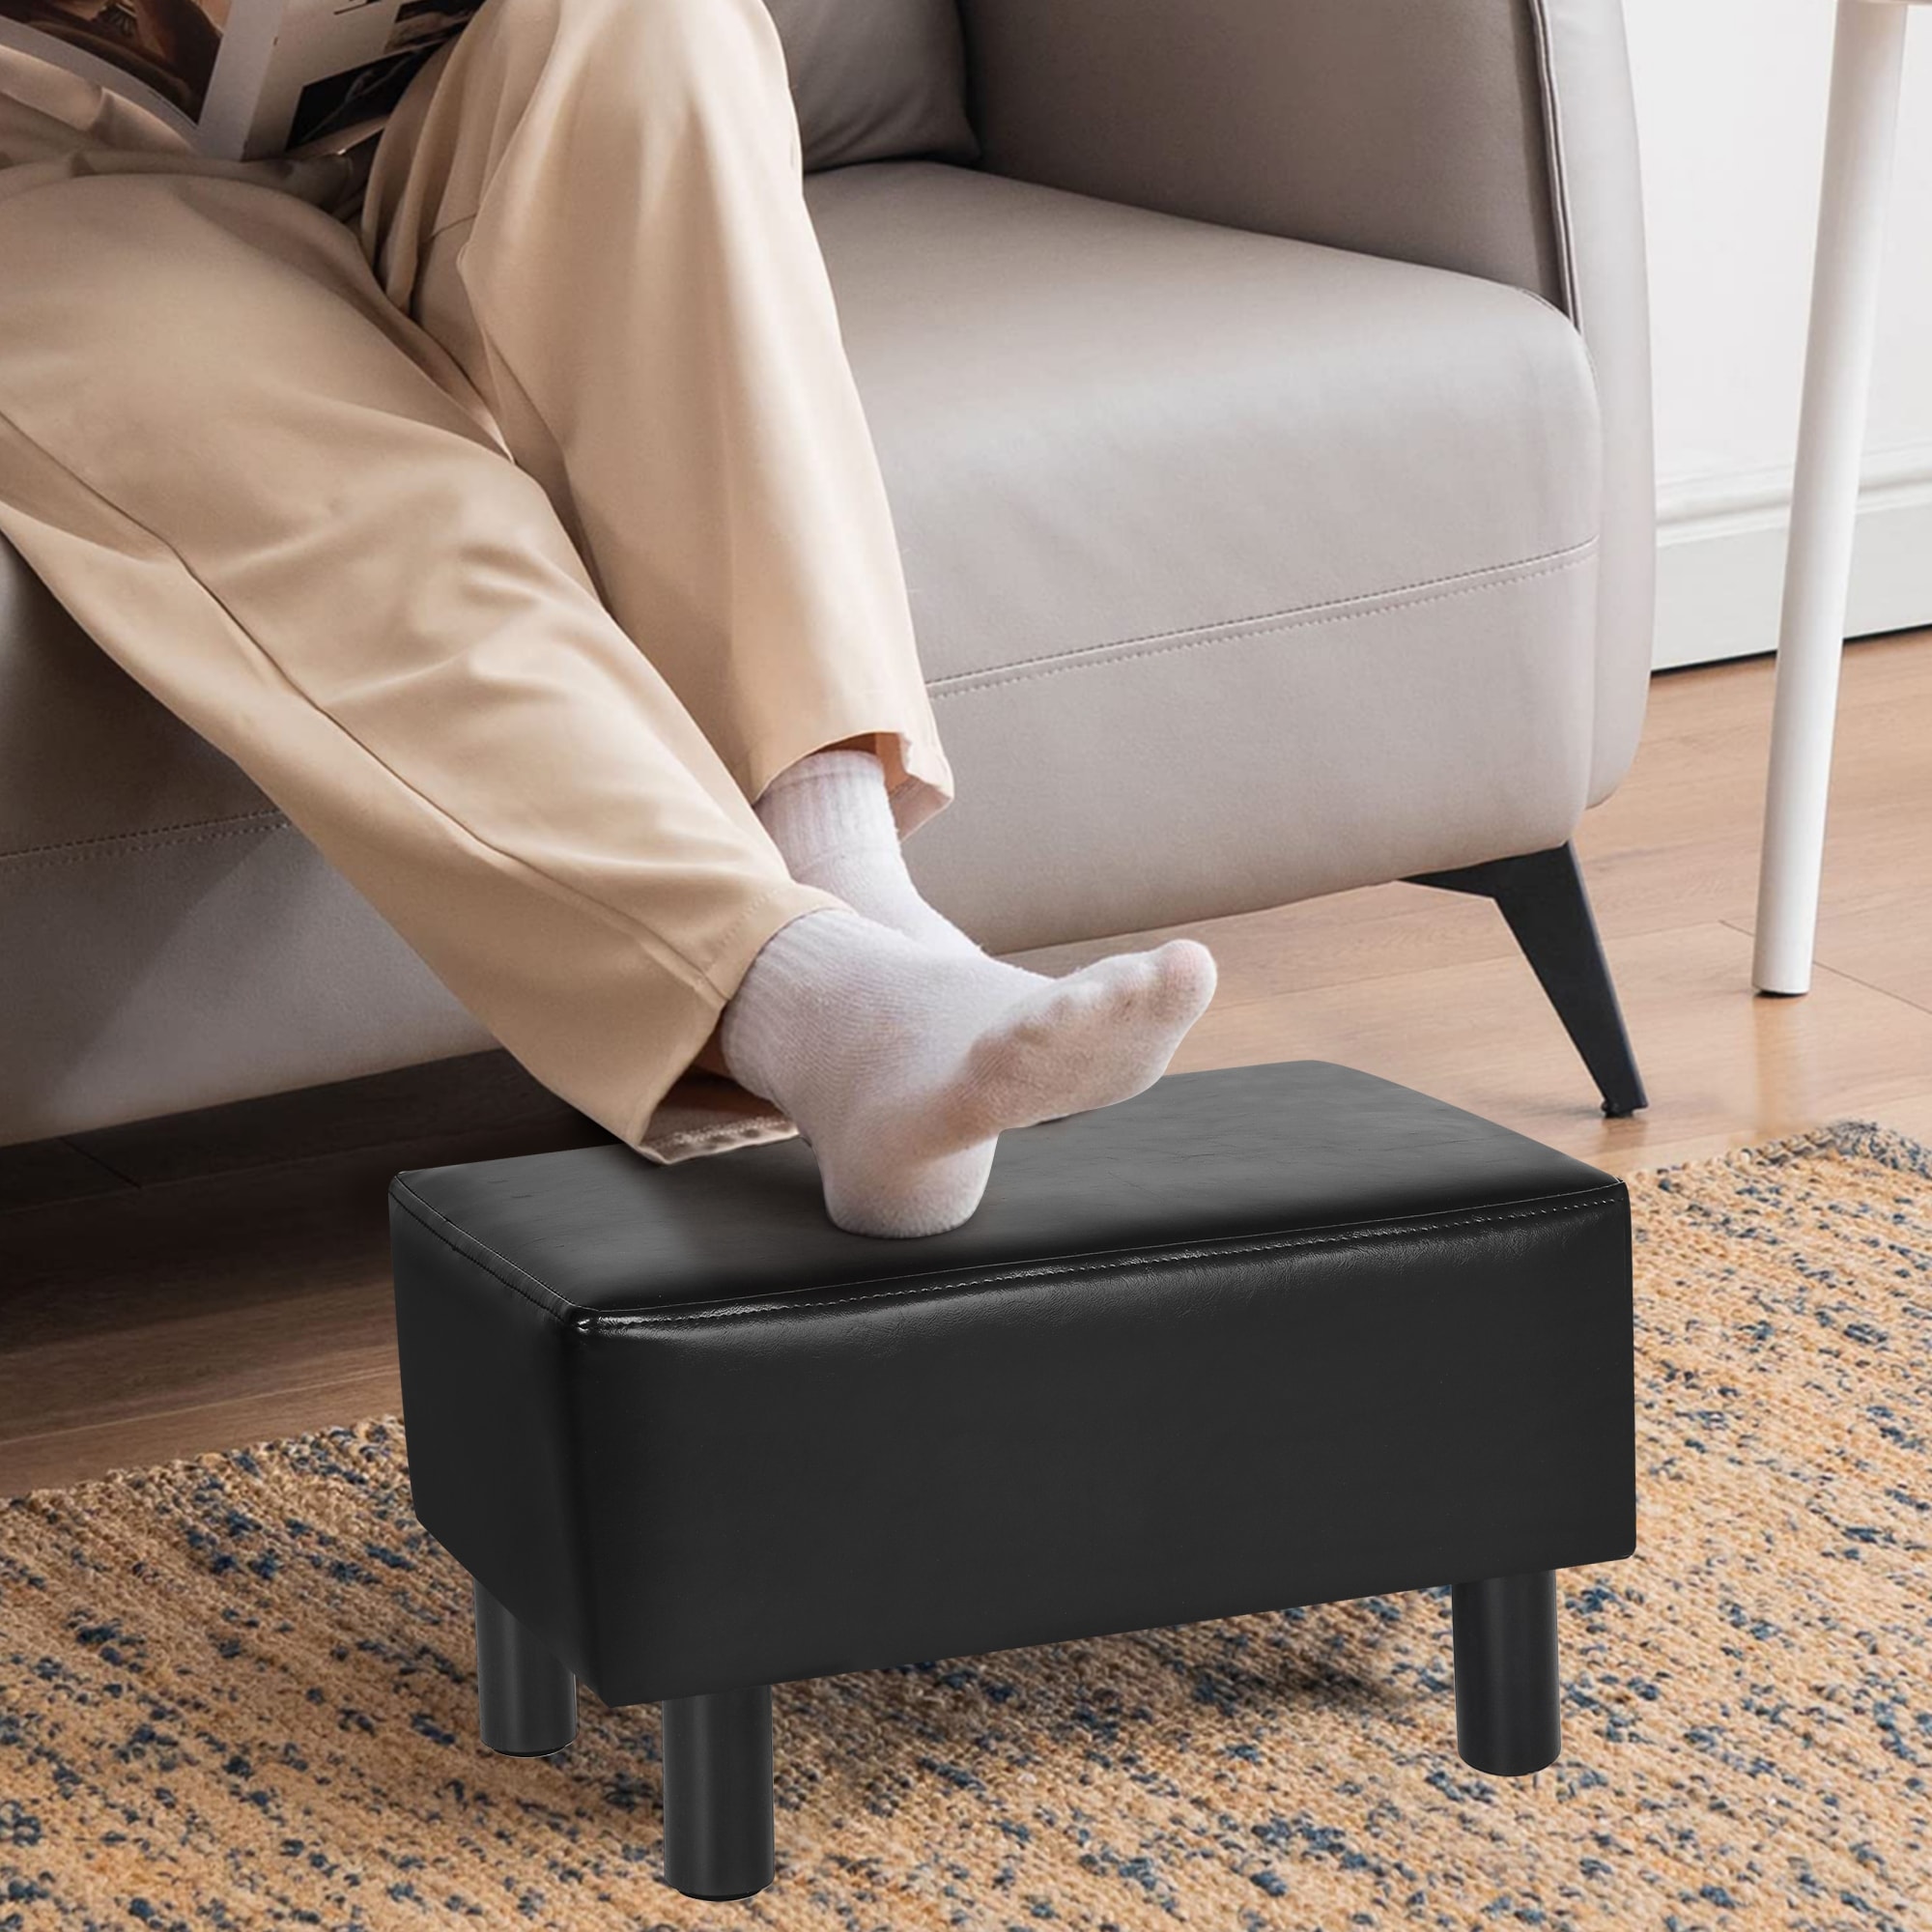 https://ak1.ostkcdn.com/images/products/is/images/direct/80eff5811195446b479eab7099fb219956503830/Adeco-Footstool-Ottoman-Faux-Leather-Foot-Rest-Stool.jpg